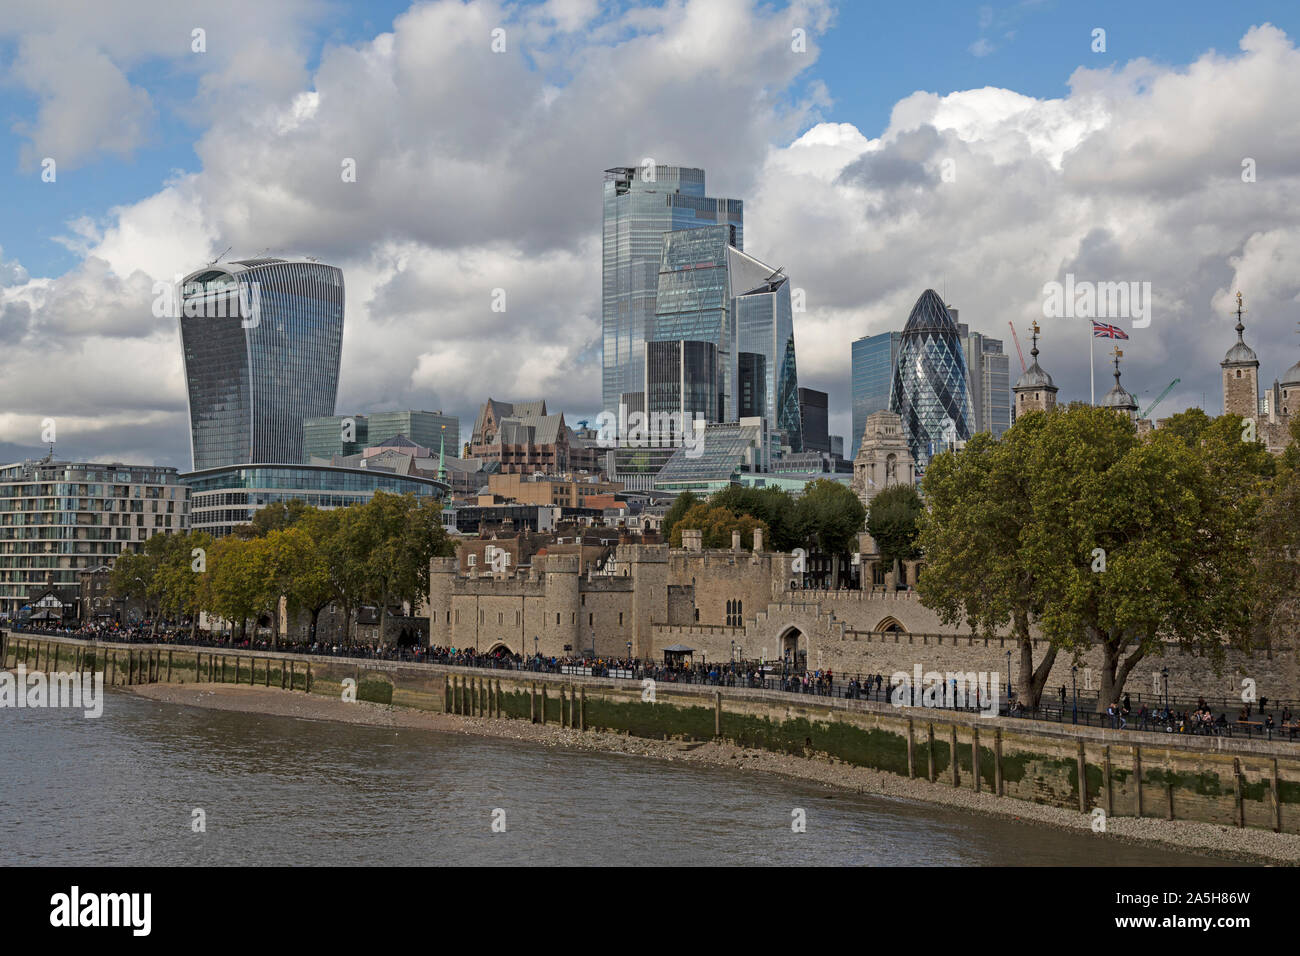 The River Thames in London, with The Tower Of London and the walkie talkie Commercial Building at 20 Fenchurch Street in the background. Stock Photo